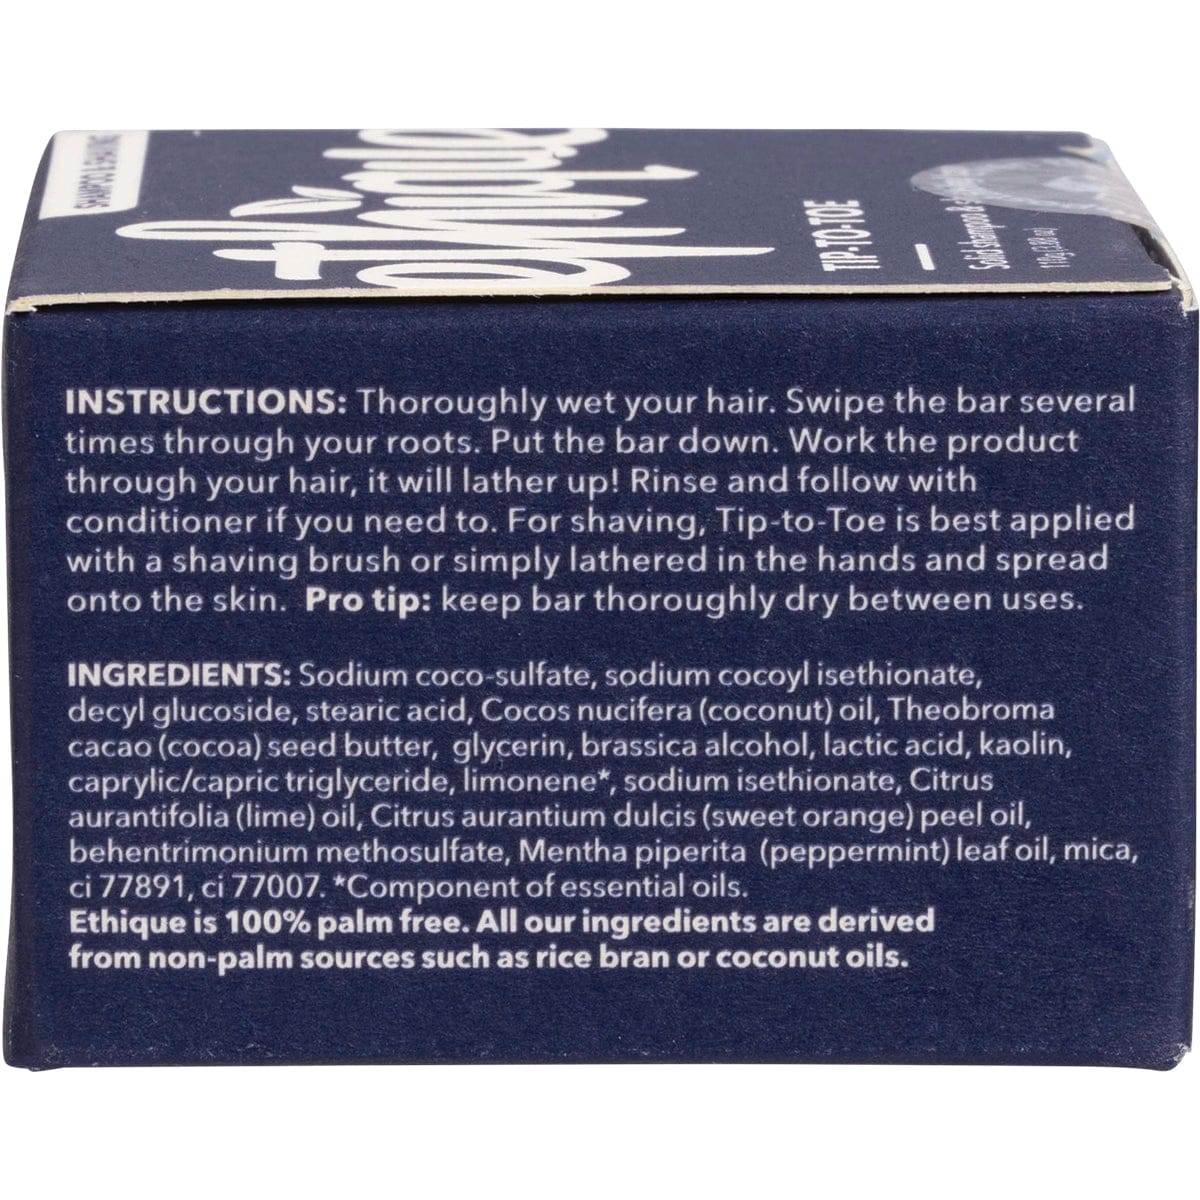 Ethique Tip-to-Toe 2-In-1 Solid Shampoo & Shaving Bar 110g